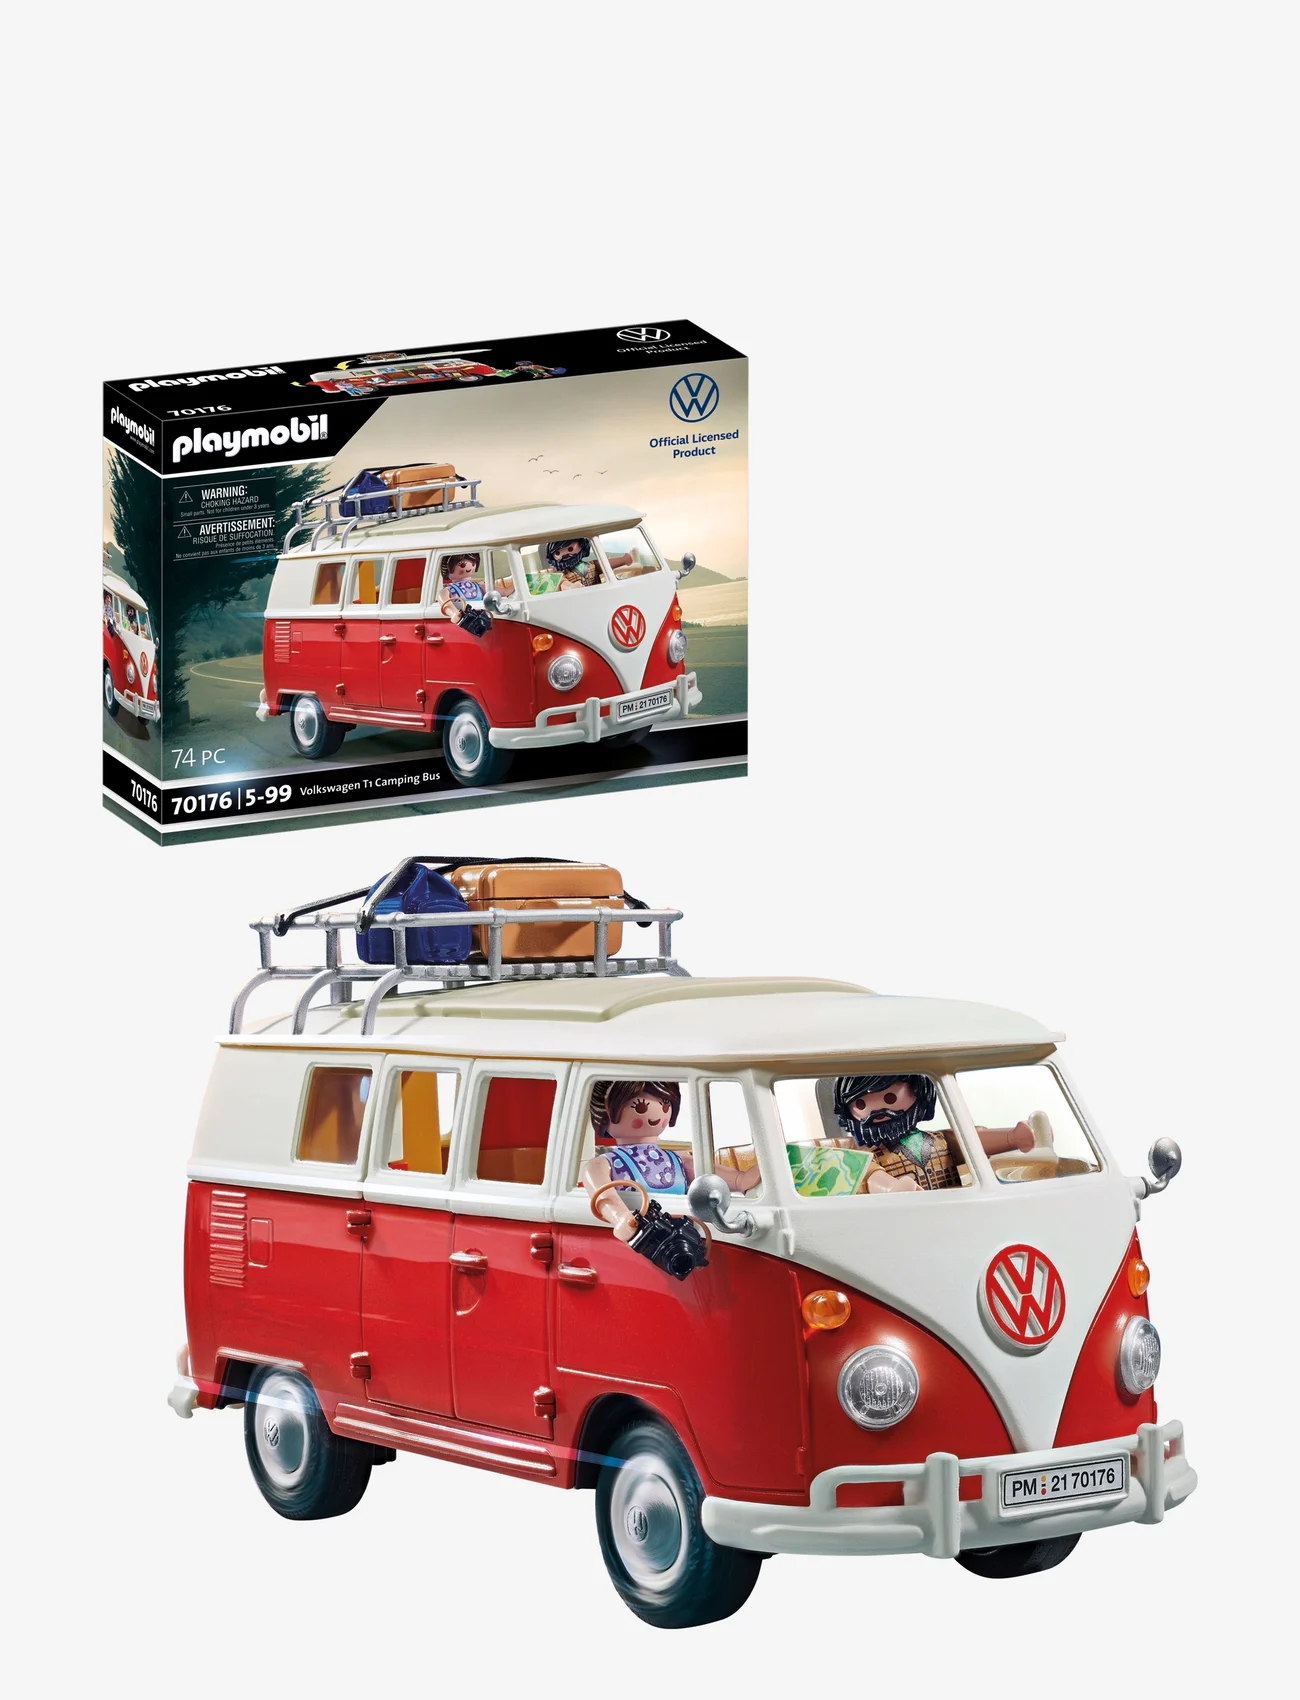 PLAYMOBIL - PLAYMOBIL Volkswagen T1 Camping Bus - 70176 - birthday gifts - multicolored - 0